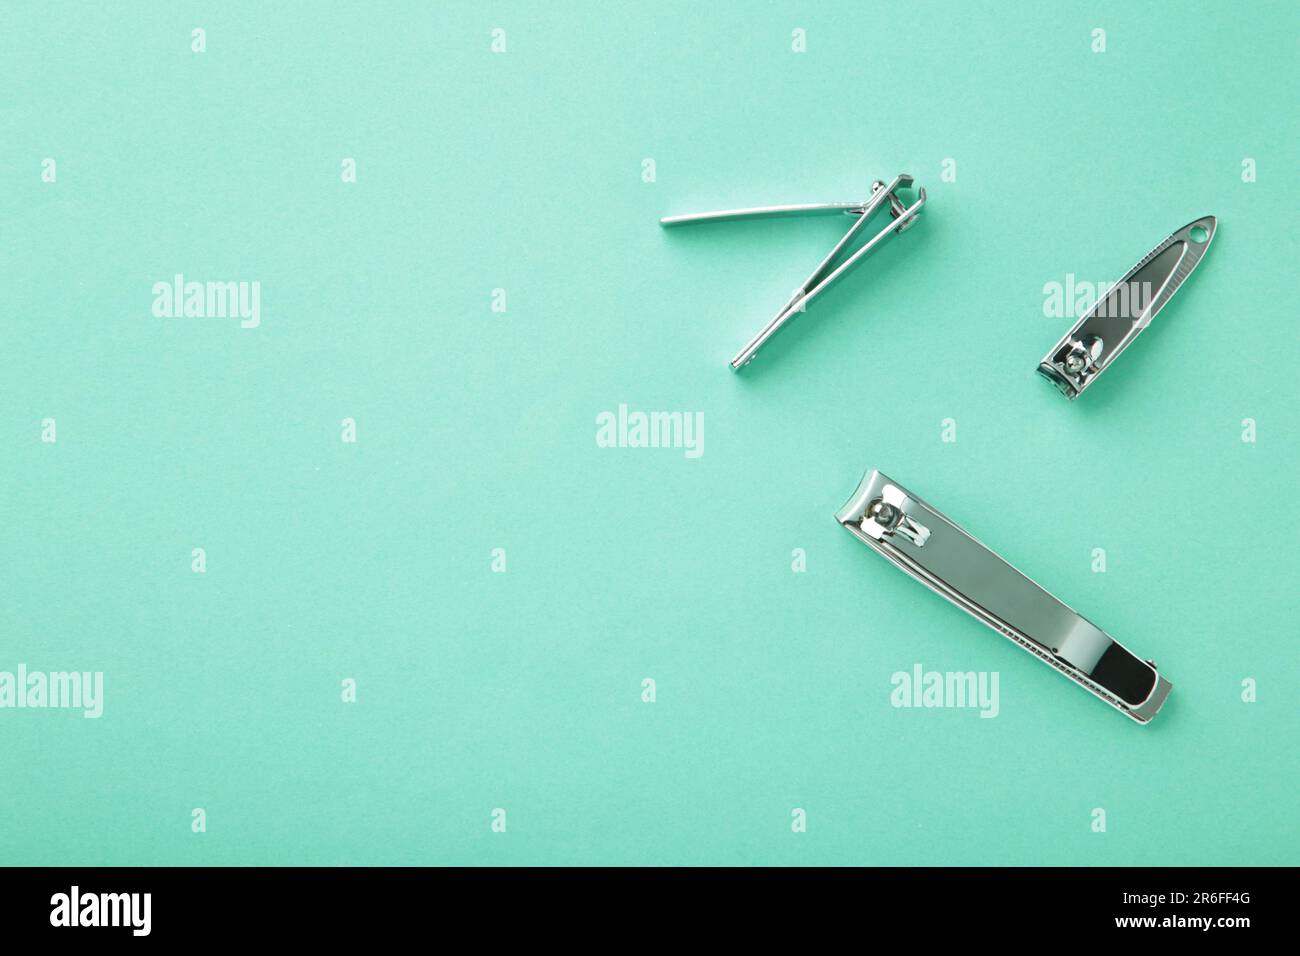 Nail clippers on mint background. Top view Stock Photo